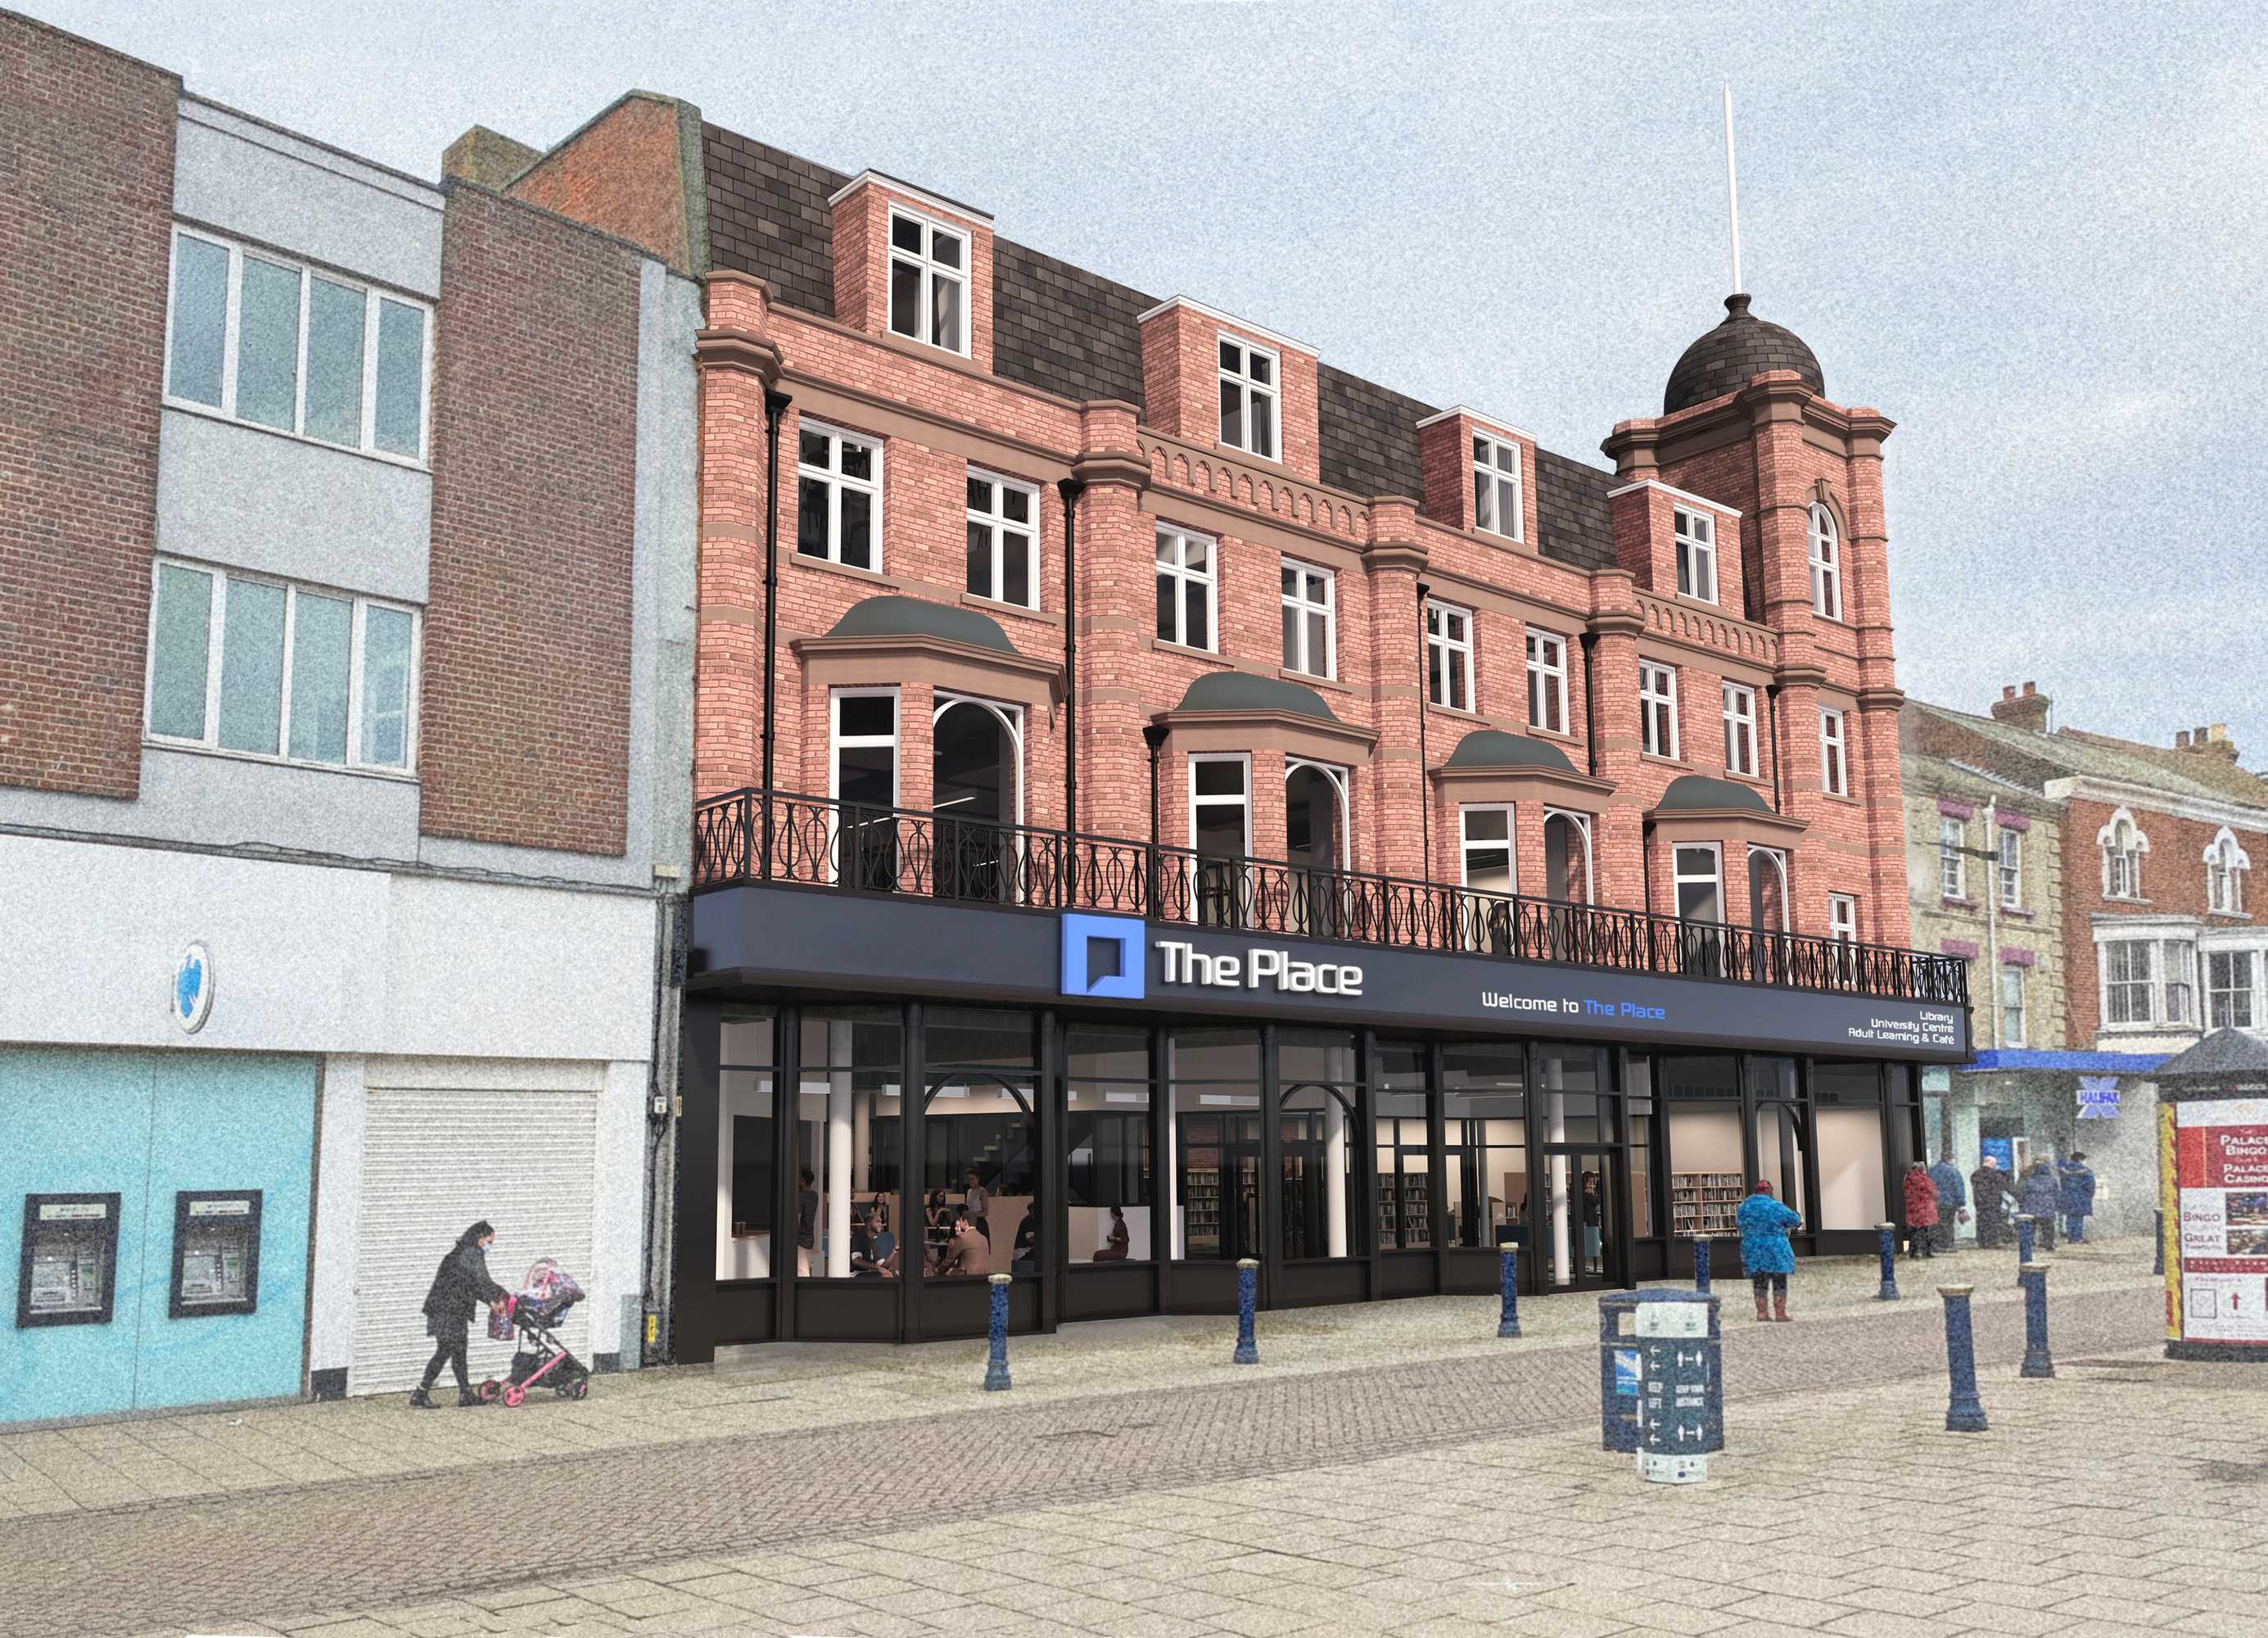 The Place front facade in context artist's impression